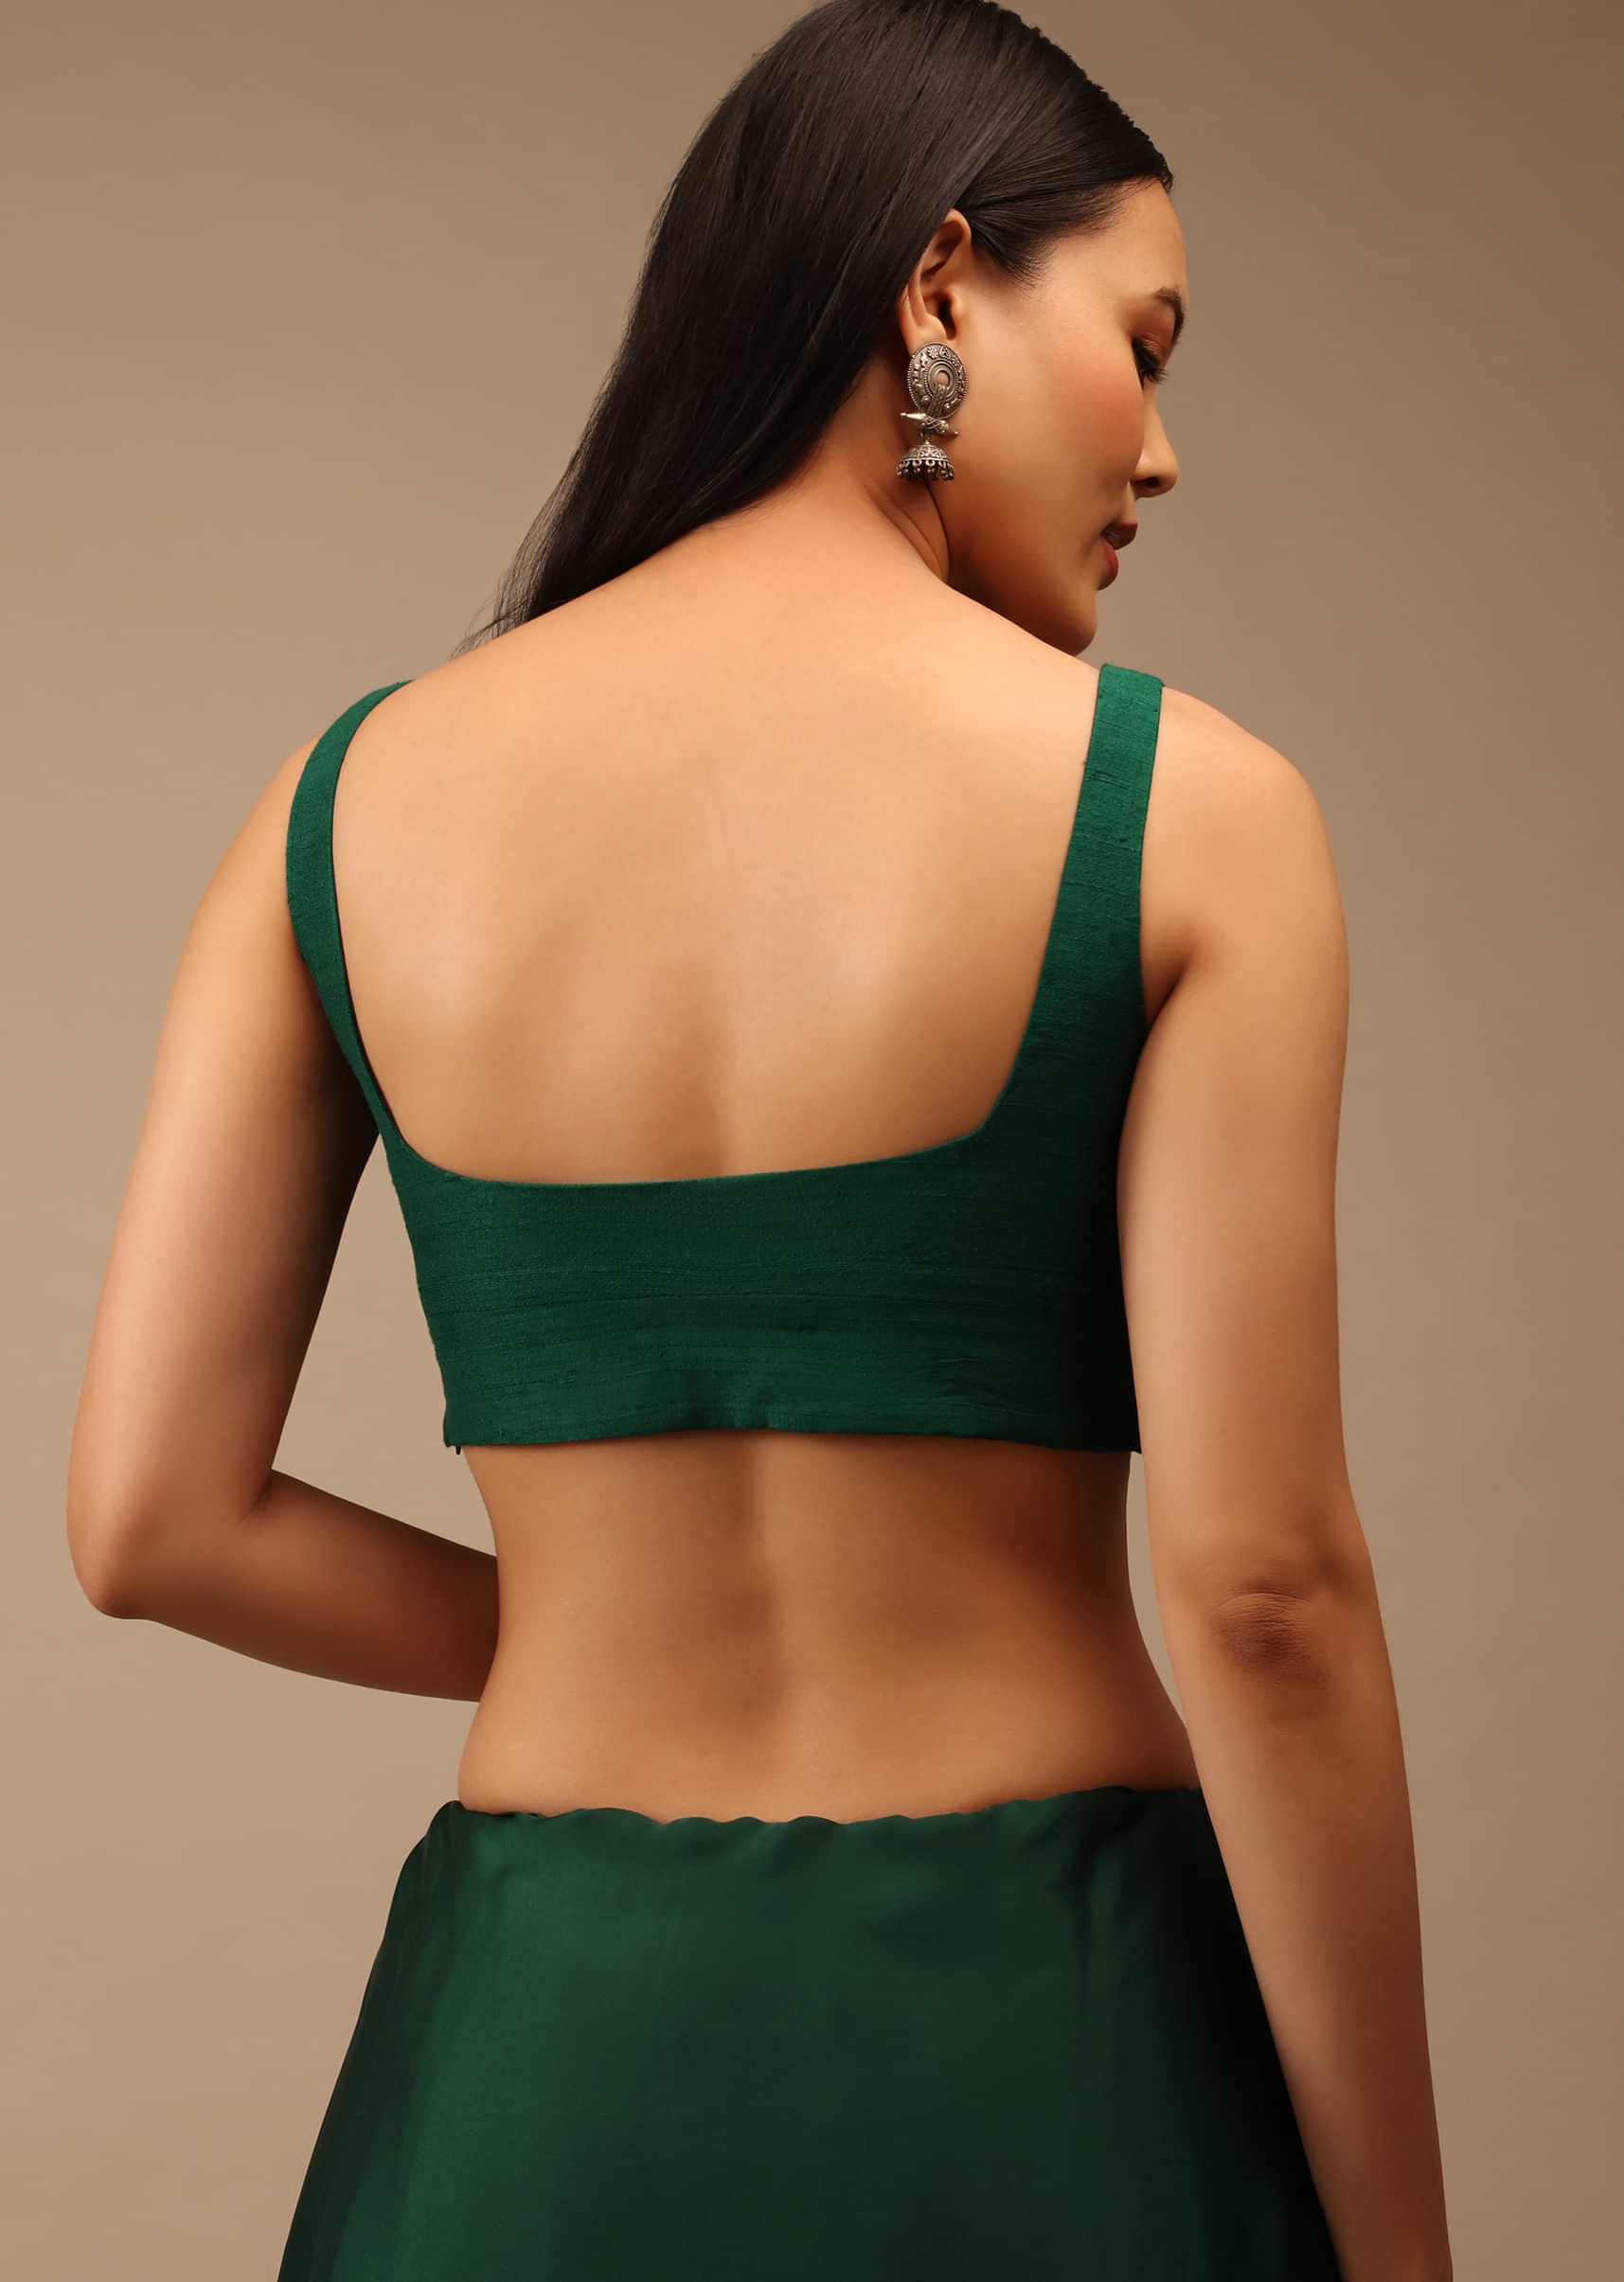 Emerald Green Blouse In Raw Silk With Overlapping Sweetheart Neckline And Cut Out Back